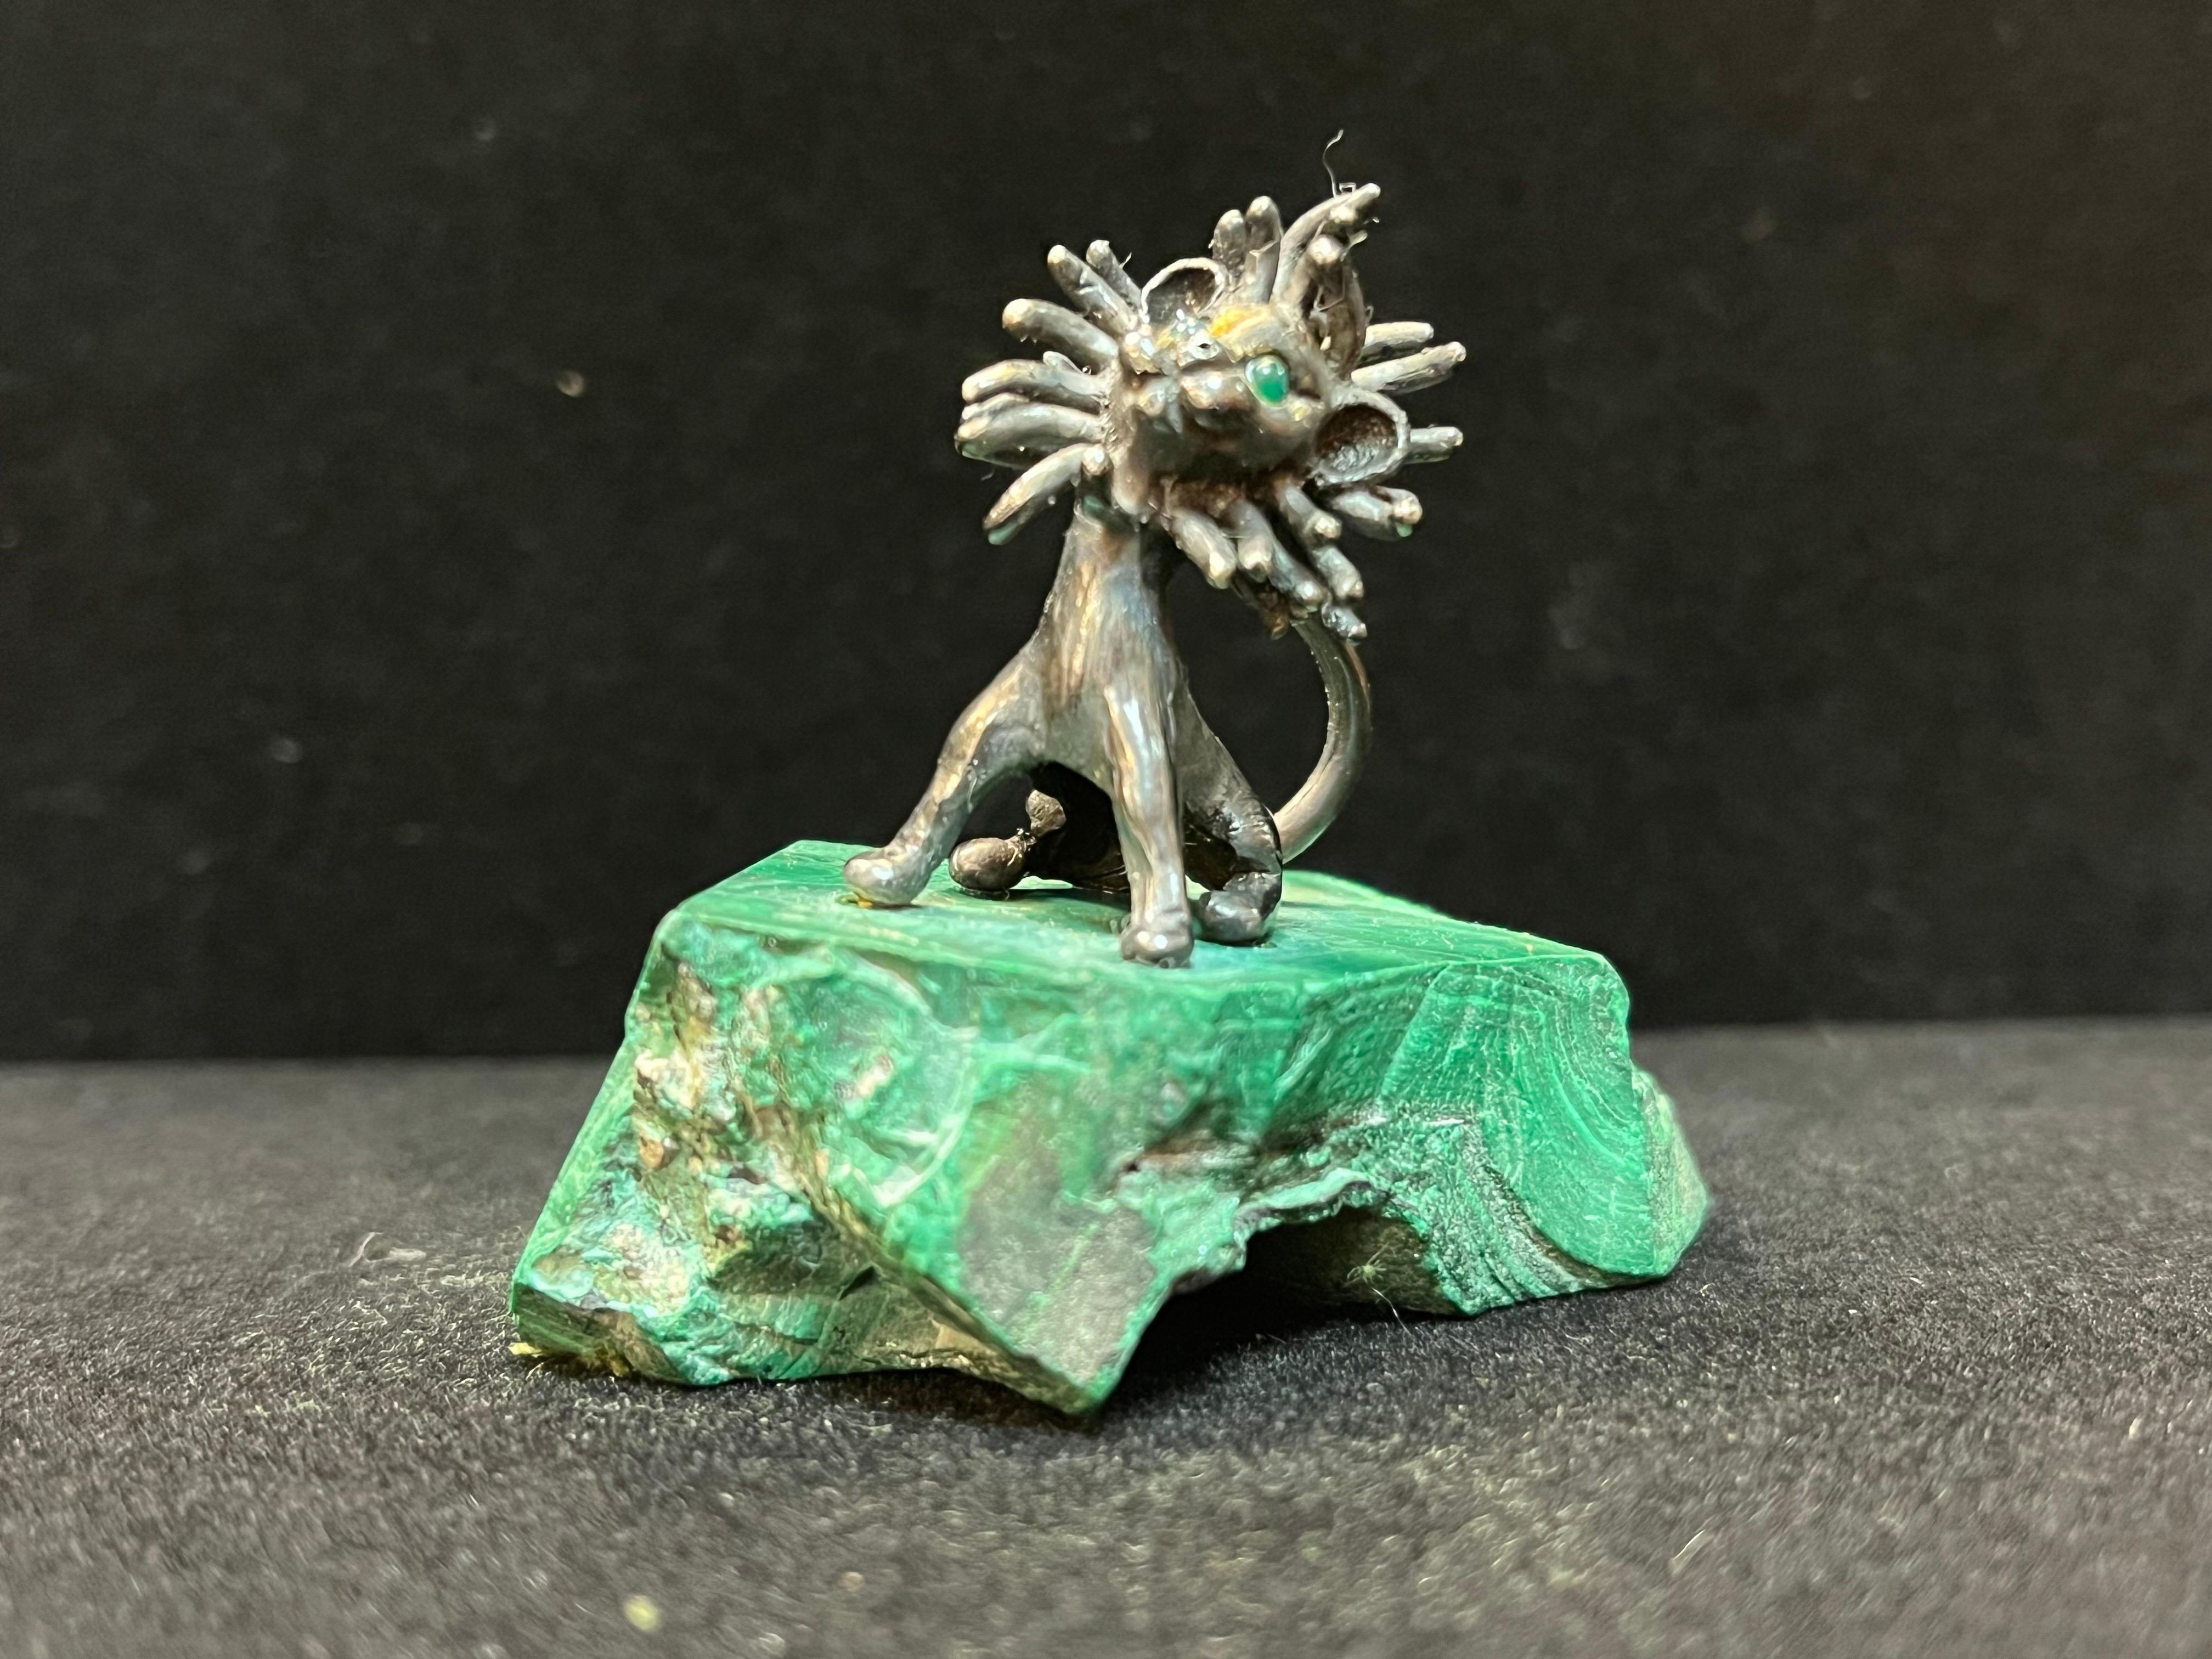 A sterling silver sculpted lion by late American artist James Schwabe (1918 - 2008) mounted onto malachite. The eyes of the lion are gemstone (possibly cabochon emerald) and there appear to be highlights in a golden metal. The sculpture is signed on